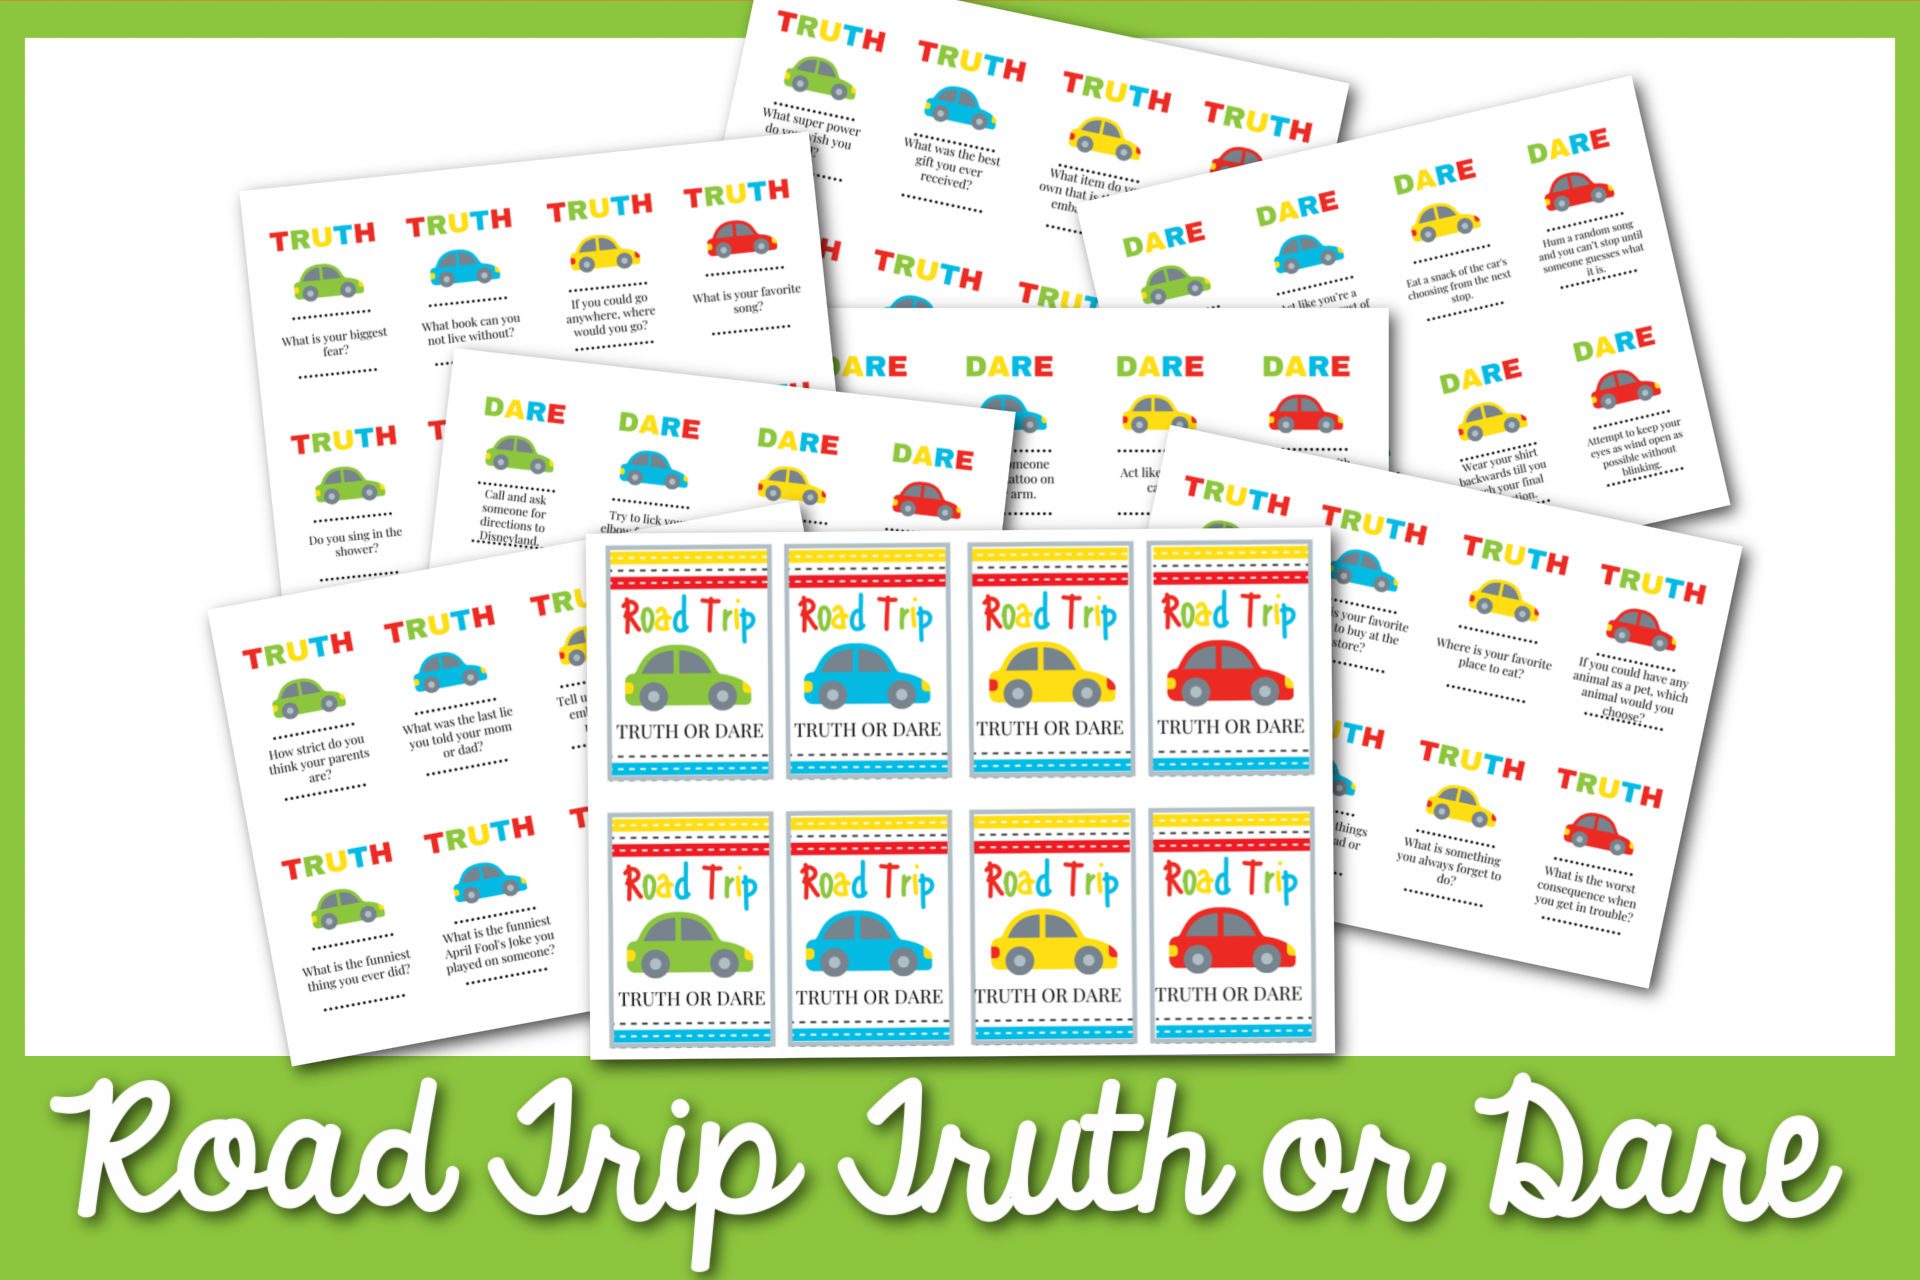 Feature: Image of road trip truth or dare questions cards